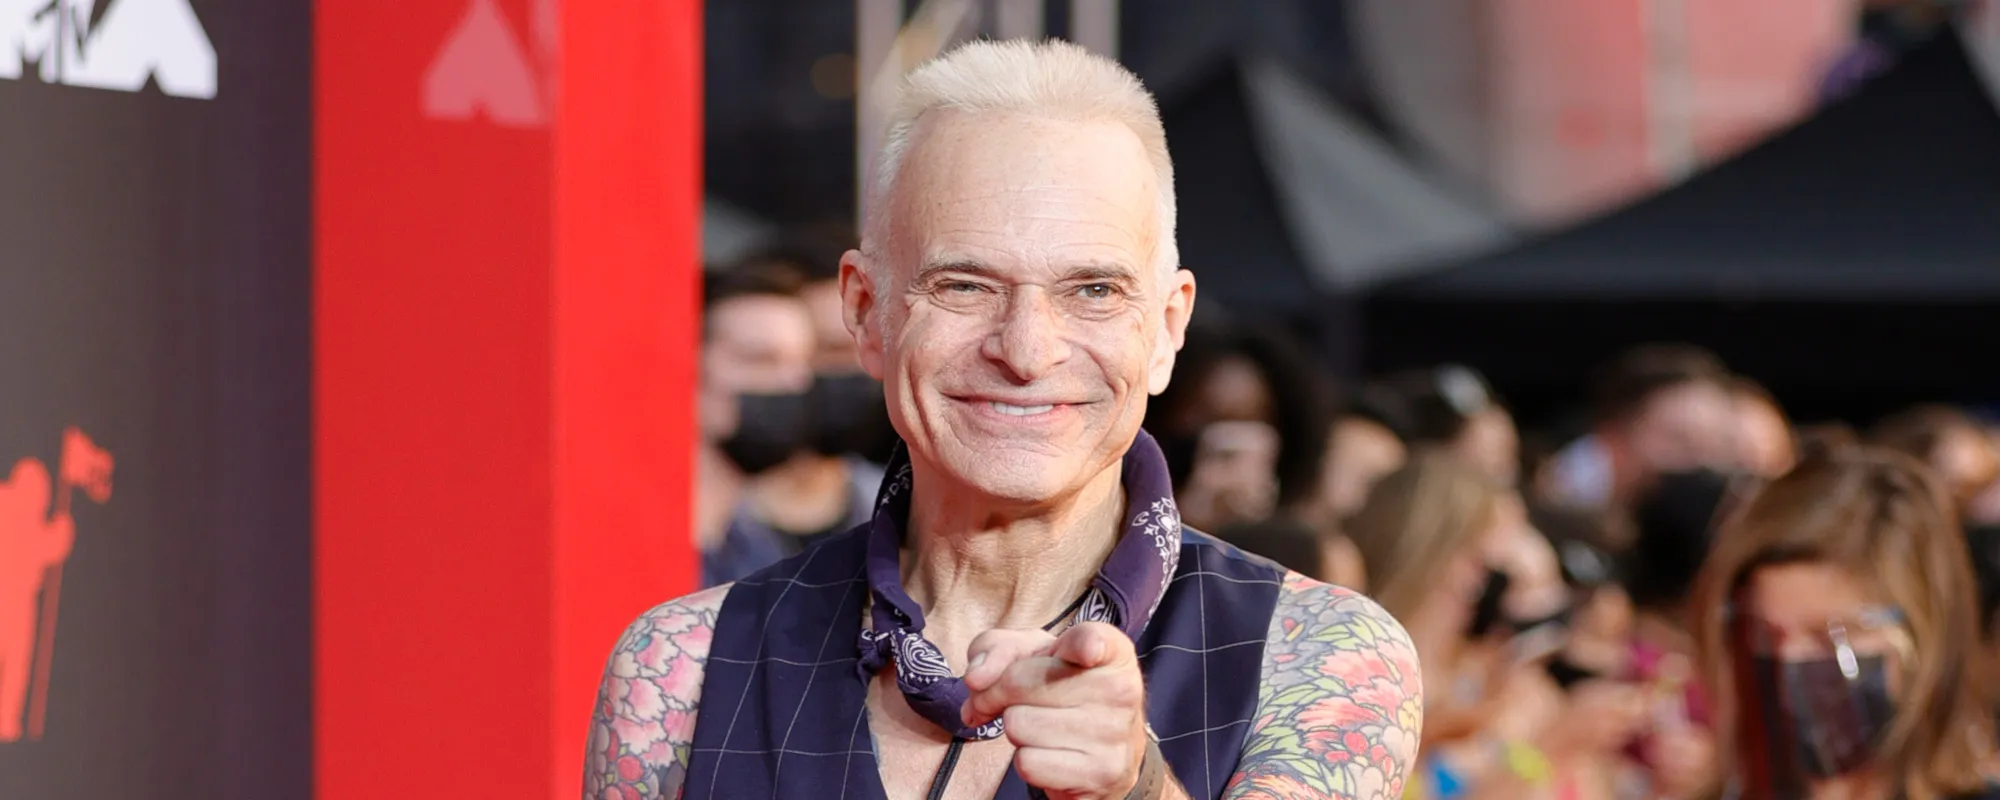 David Lee Roth Releases Upbeat New Archival Solo Song, “Manda Bala”